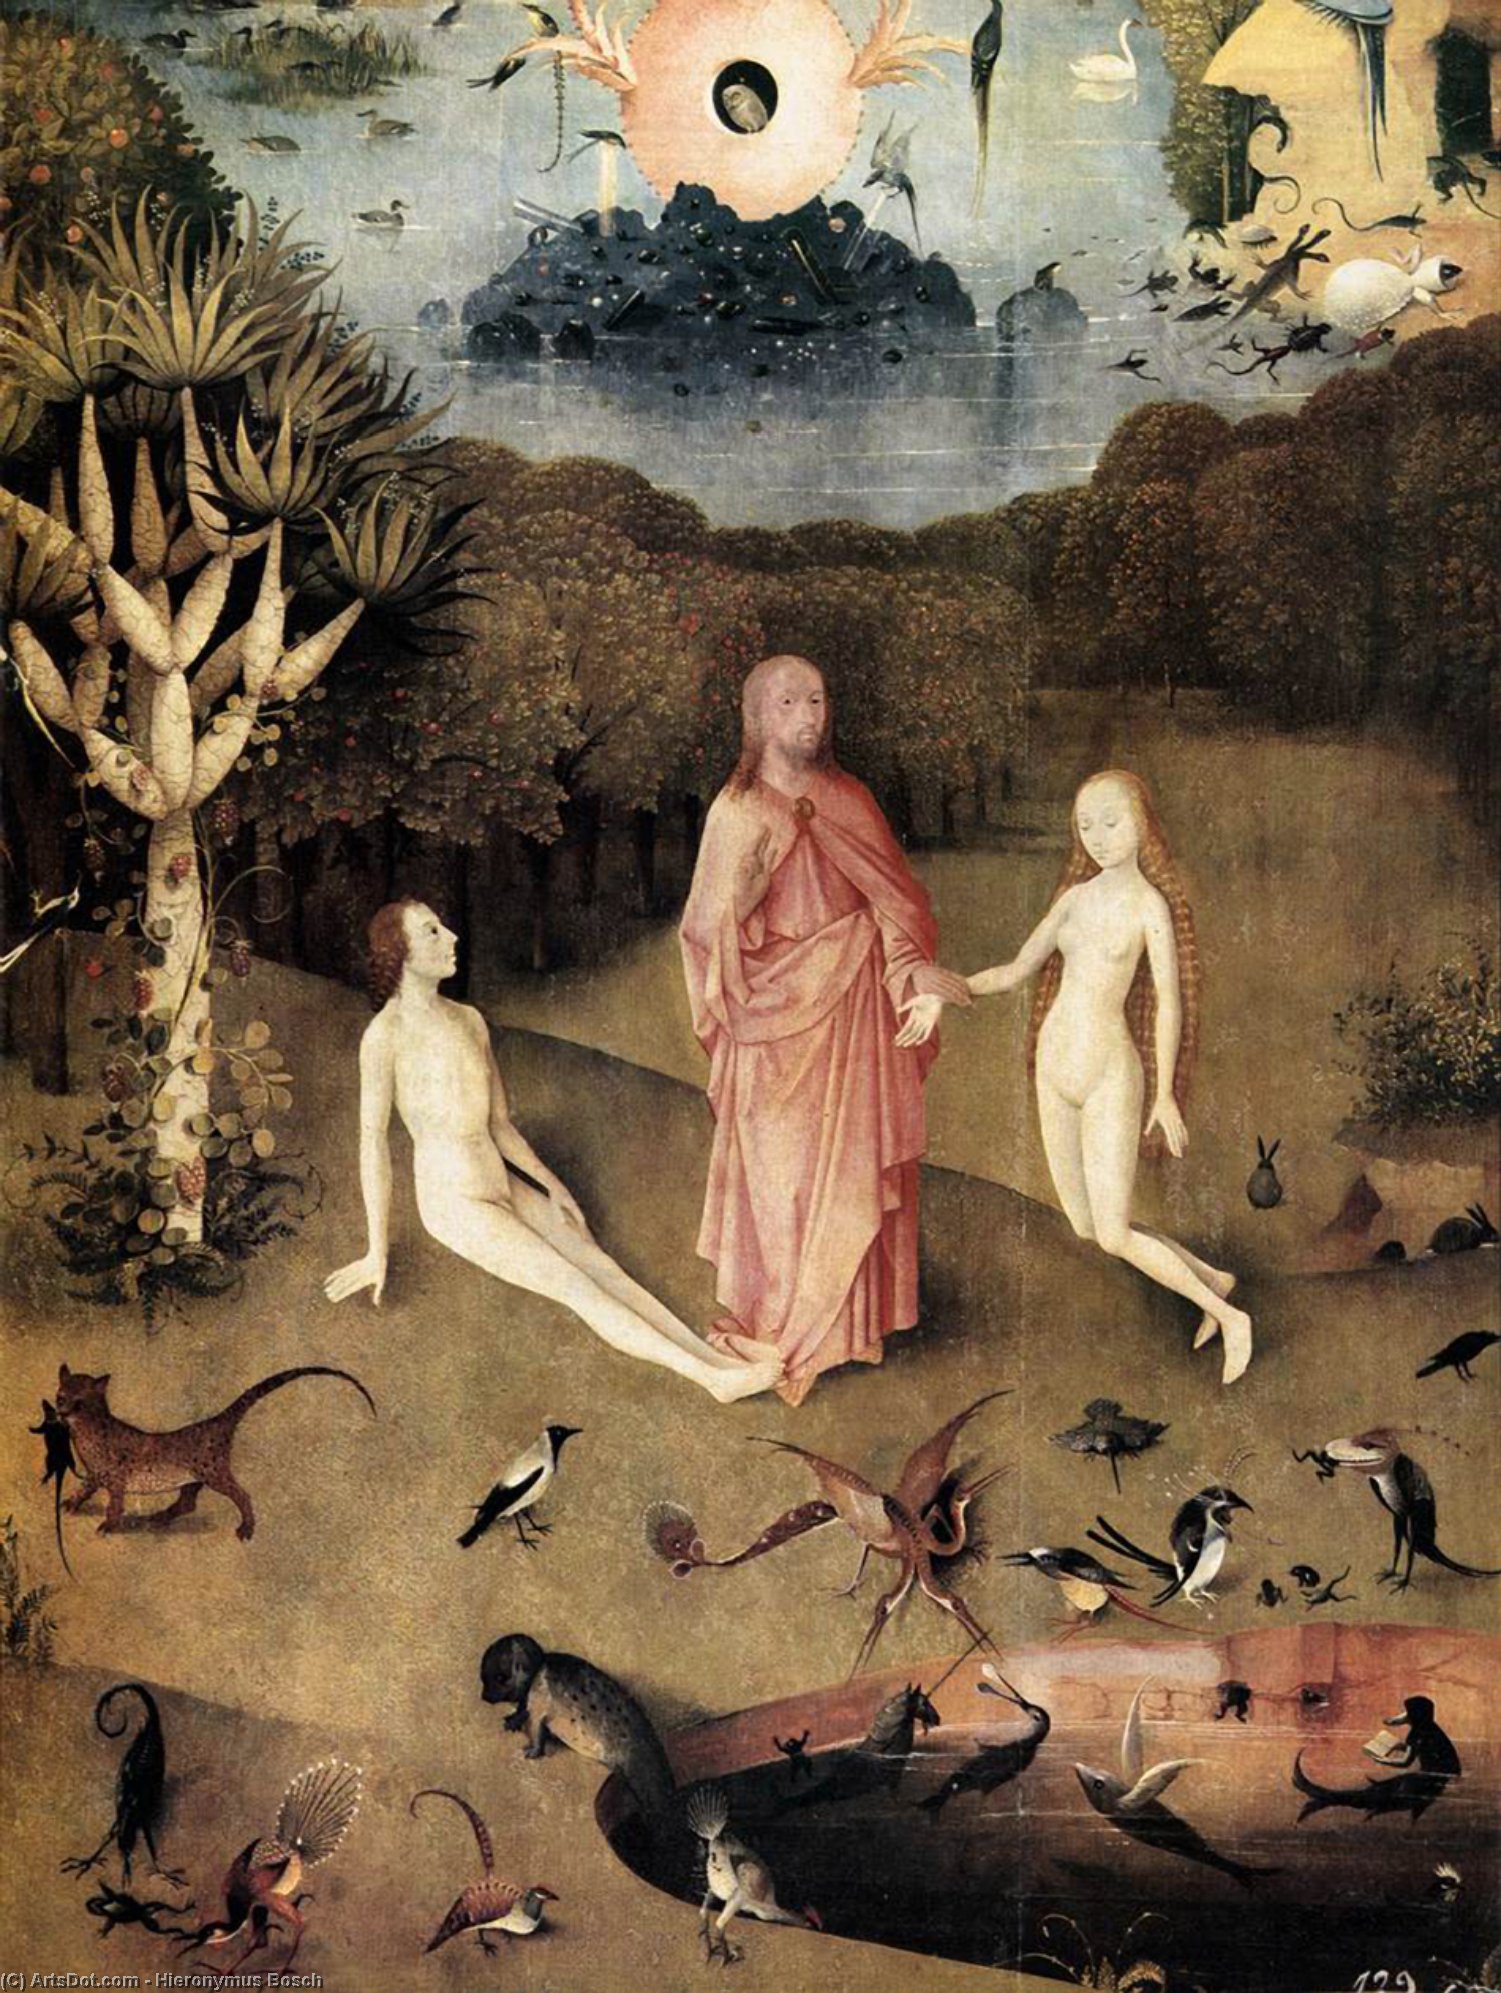 WikiOO.org - 백과 사전 - 회화, 삽화 Hieronymus Bosch - Triptych of Garden of Earthly Delights (detail) (33)